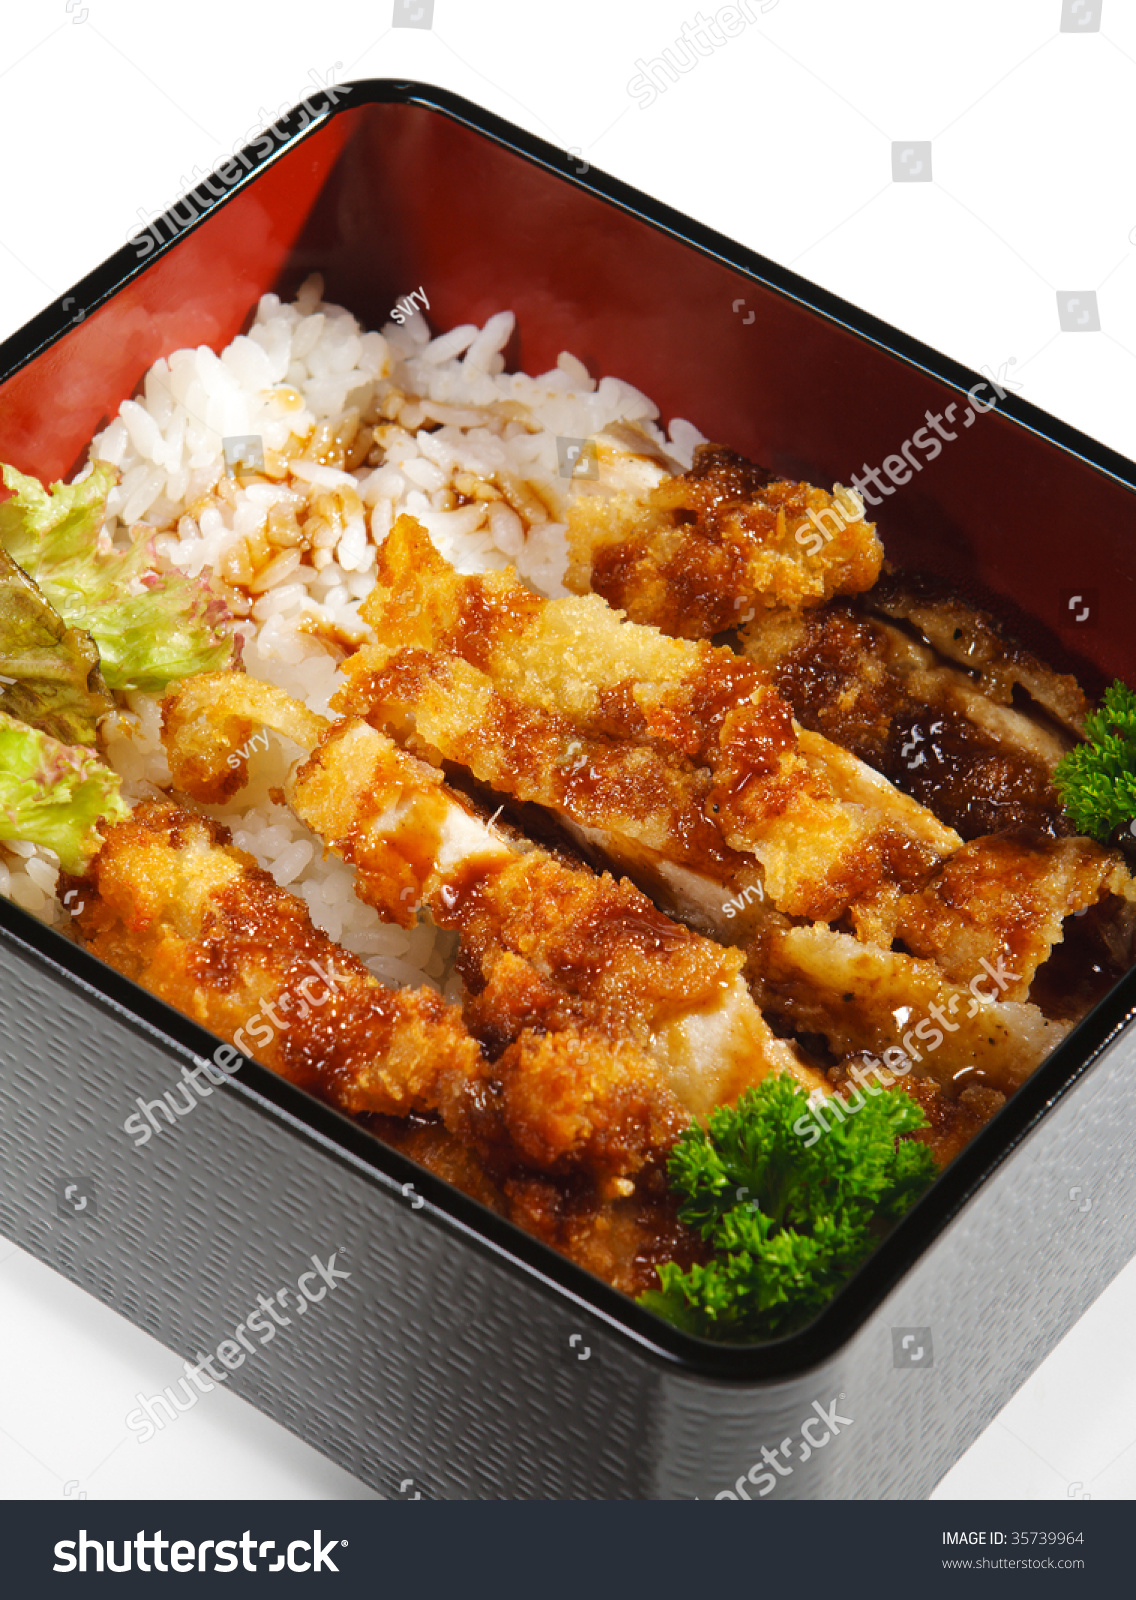 Japanese Cuisine - Fried Pork Meat With Rice And Parsley Stock Photo